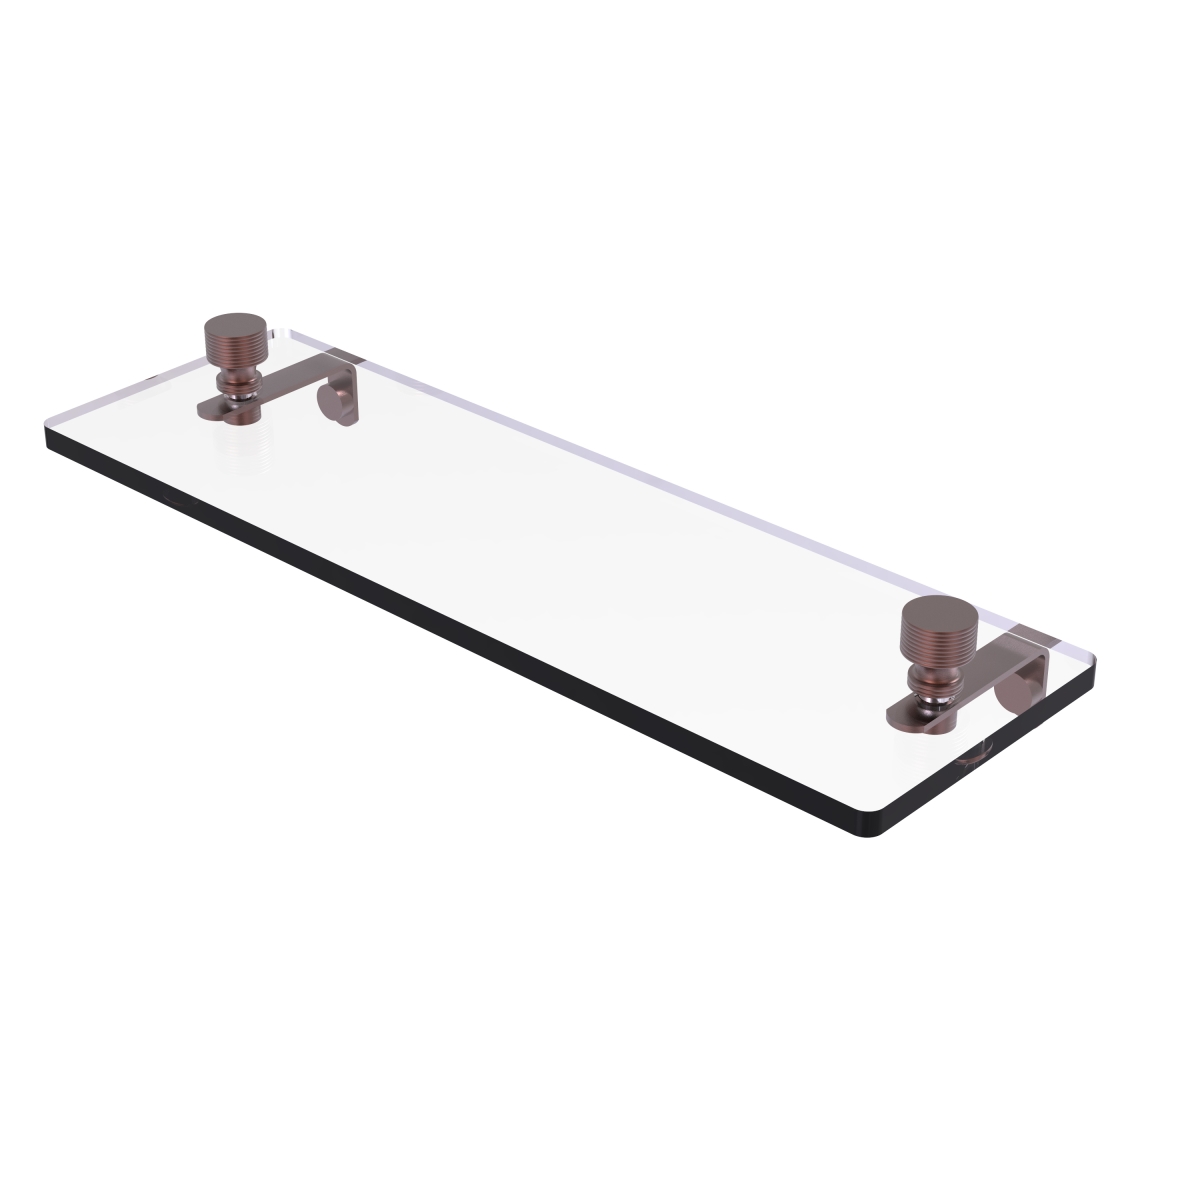 Picture of Allied Brass FT-1-16-CA 16 in. Foxtrot Glass Vanity Shelf with Beveled Edges&#44; Antique Copper